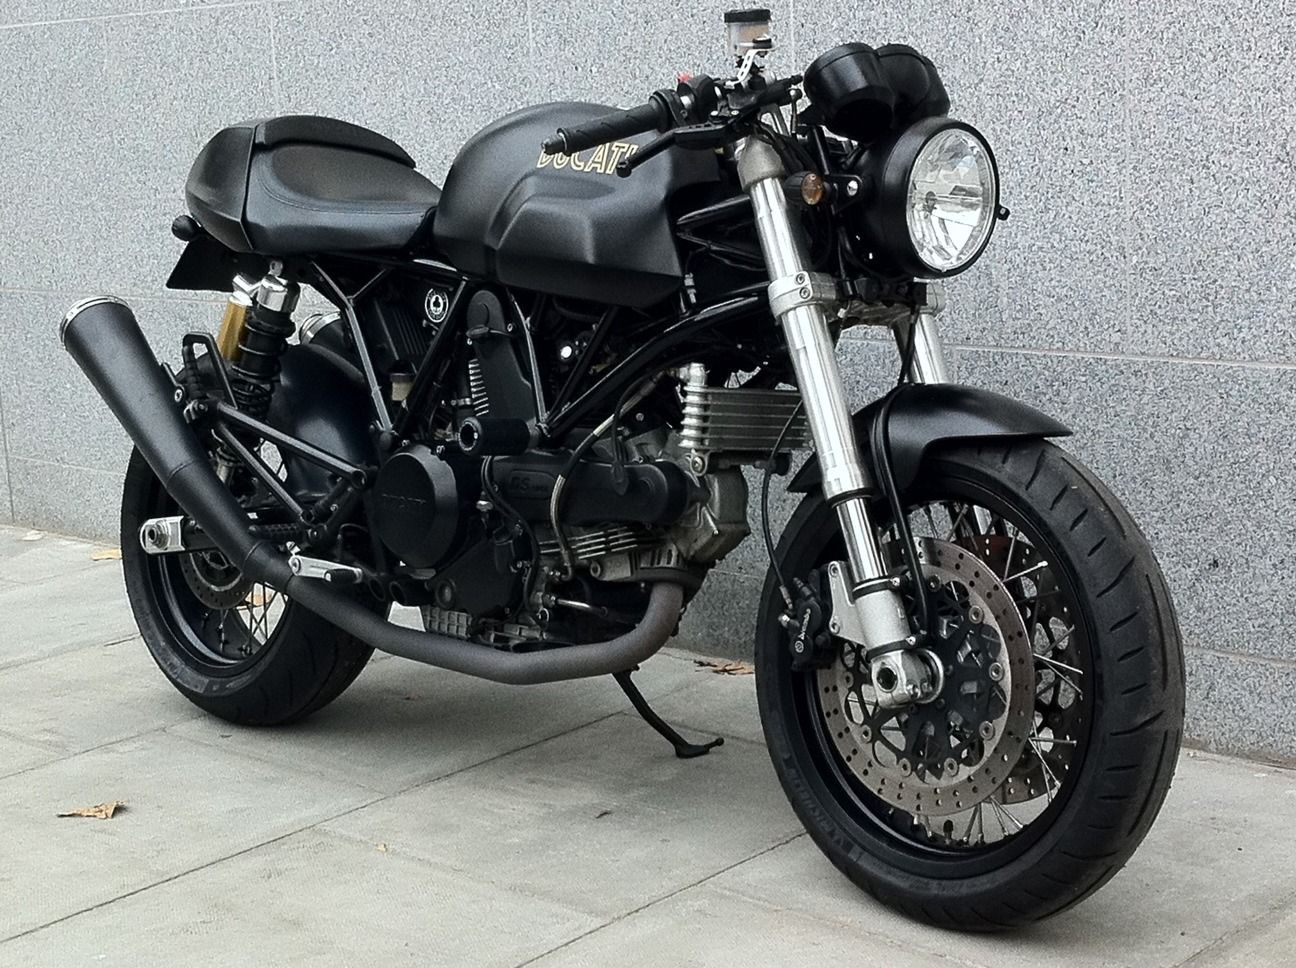 Ducati cafe racer/street tracker. Great little essay about riding if you follow